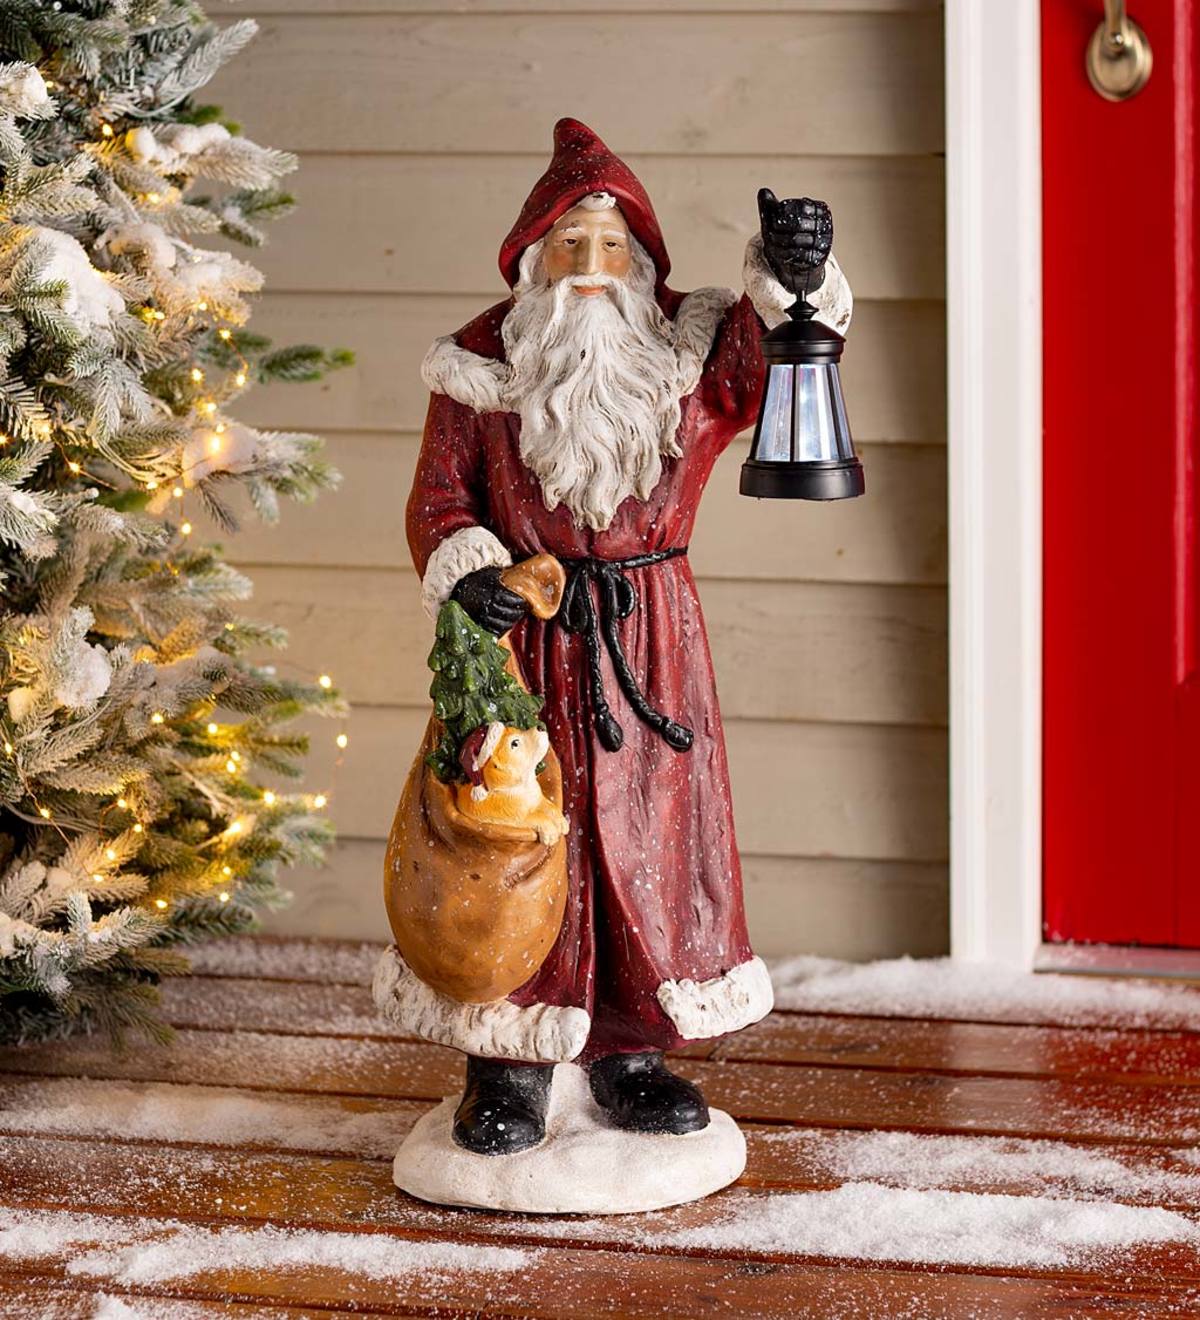 Santa Claus with Solar Lantern and a Puppy In His Bag Decoration